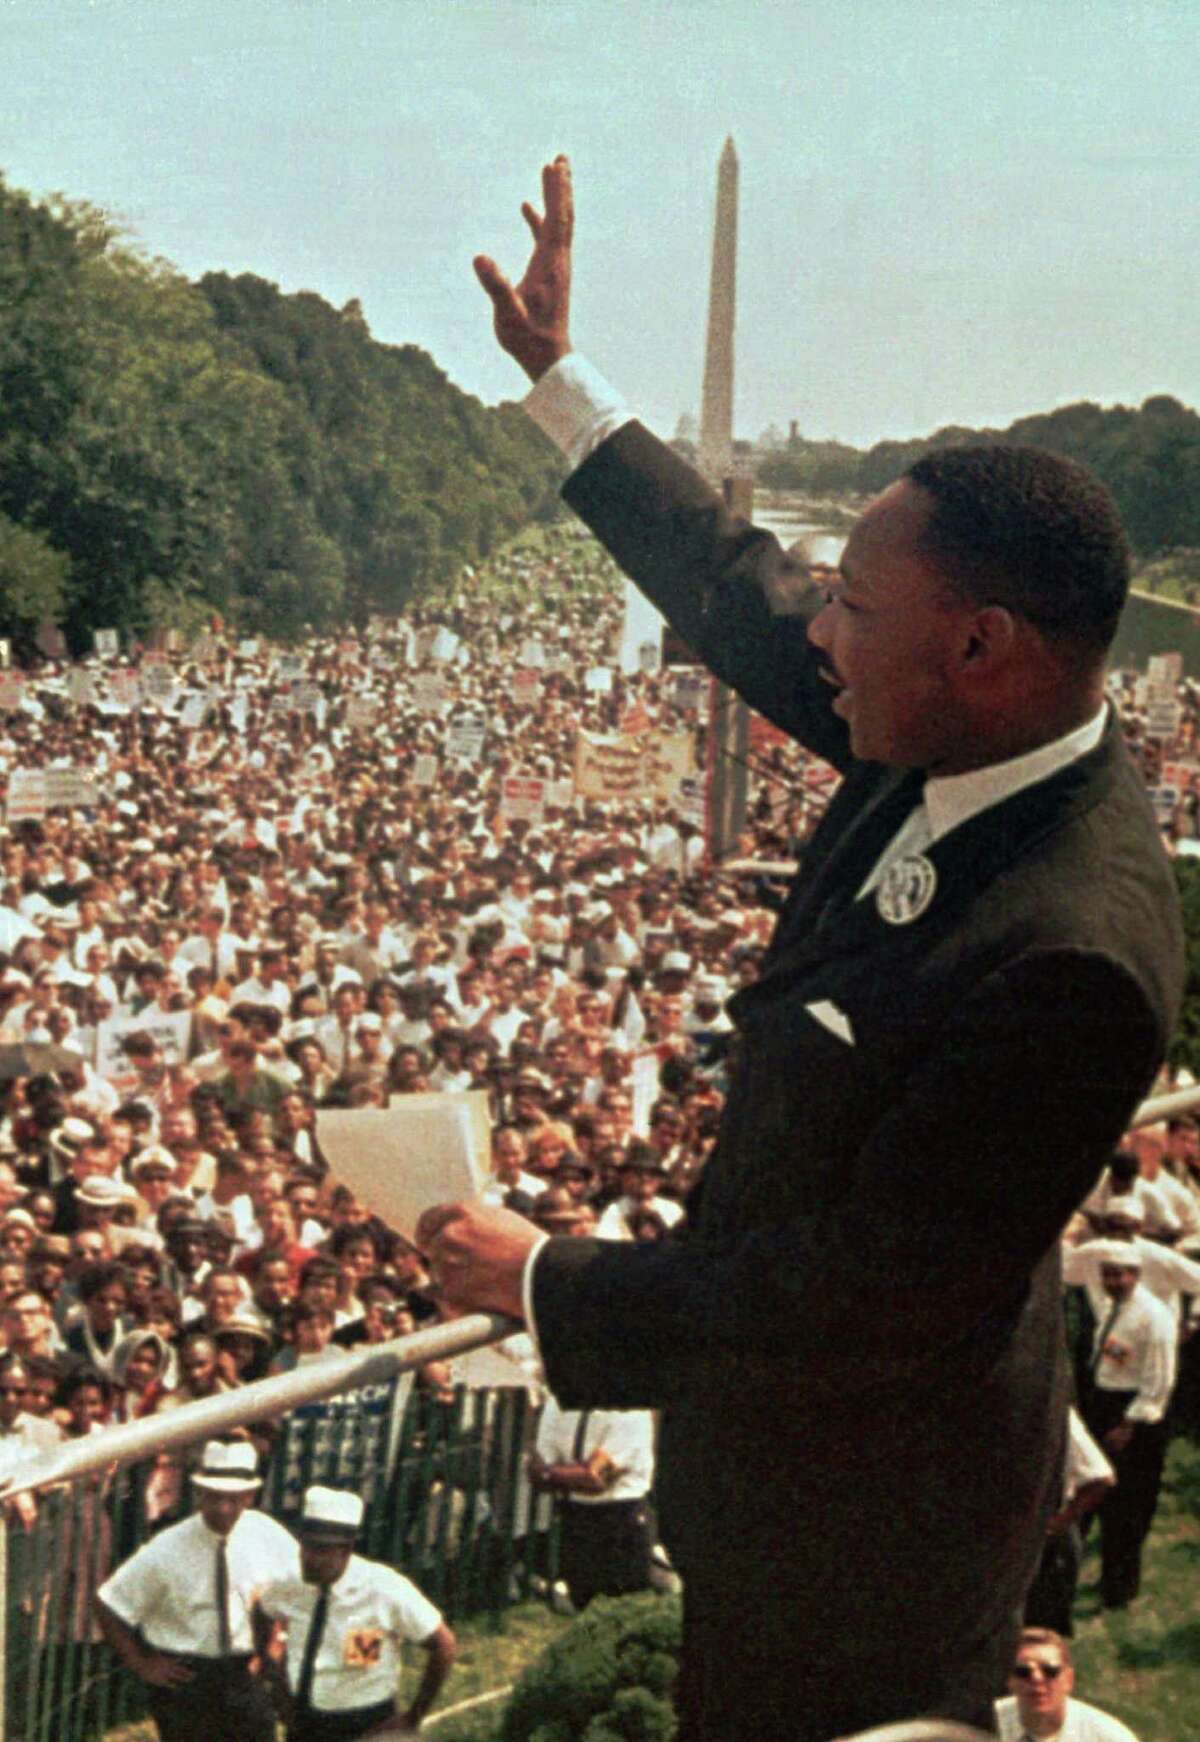 Martin Luther King Jr. acknowledges the crowd at the Lincoln Memorial for his "I Have a Dream" speech during the March on Washington, D.C. Aug. 28, 1963. While San Antonio’s march to commemorate King has been canceled, DreamWeek carries on.